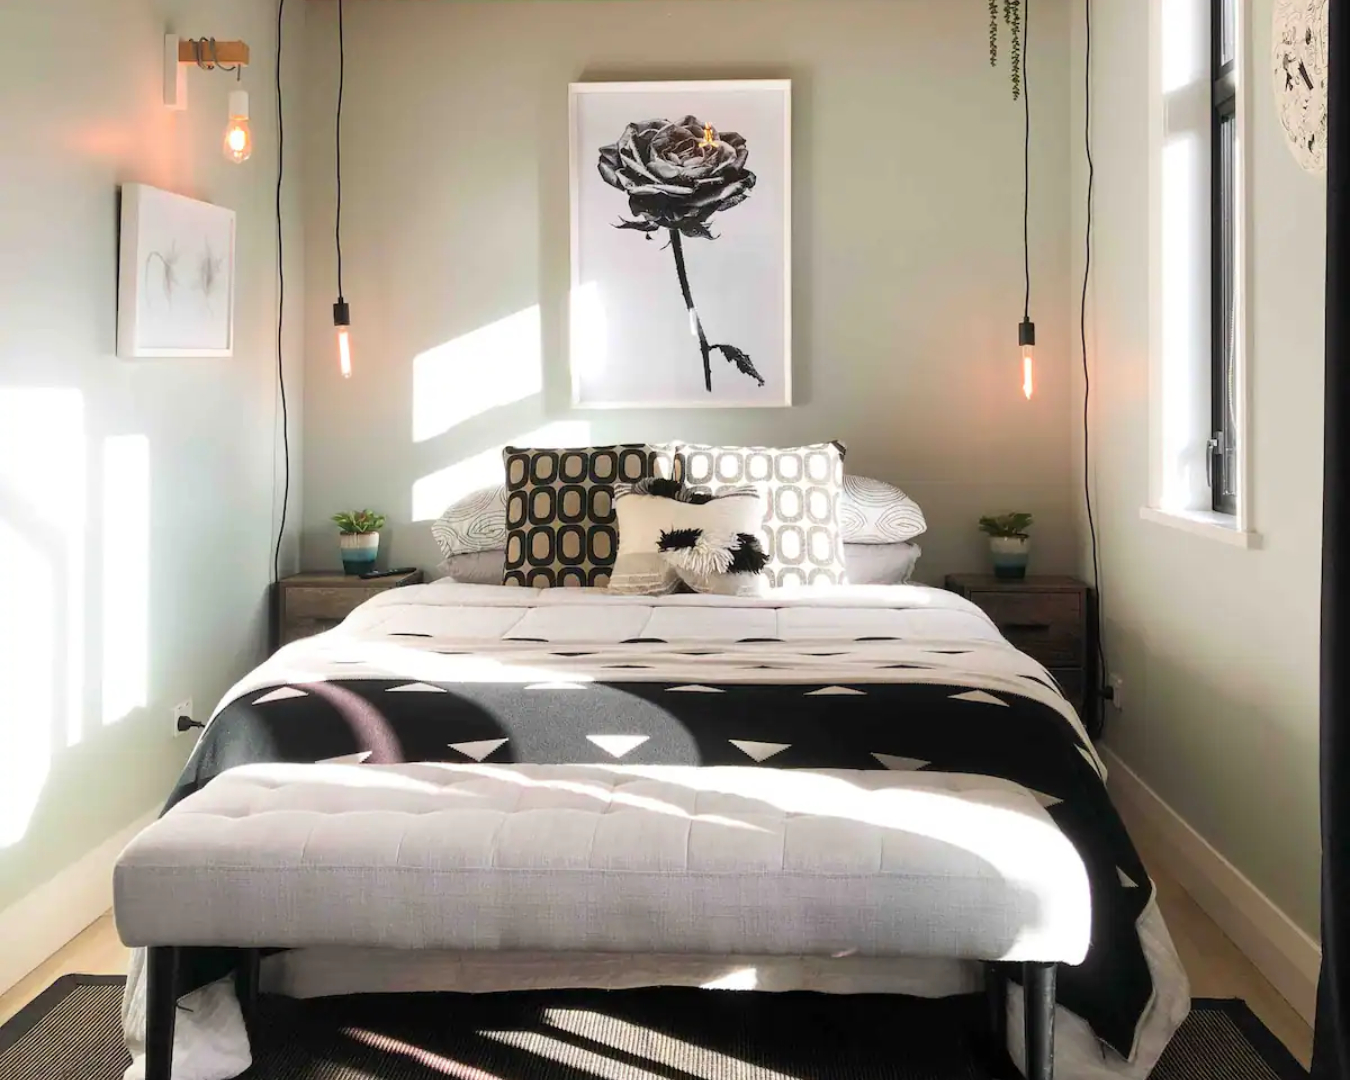 The lush bedroom at the Mount Victoria Studio is decked out in stylish, monochromatic decor. 